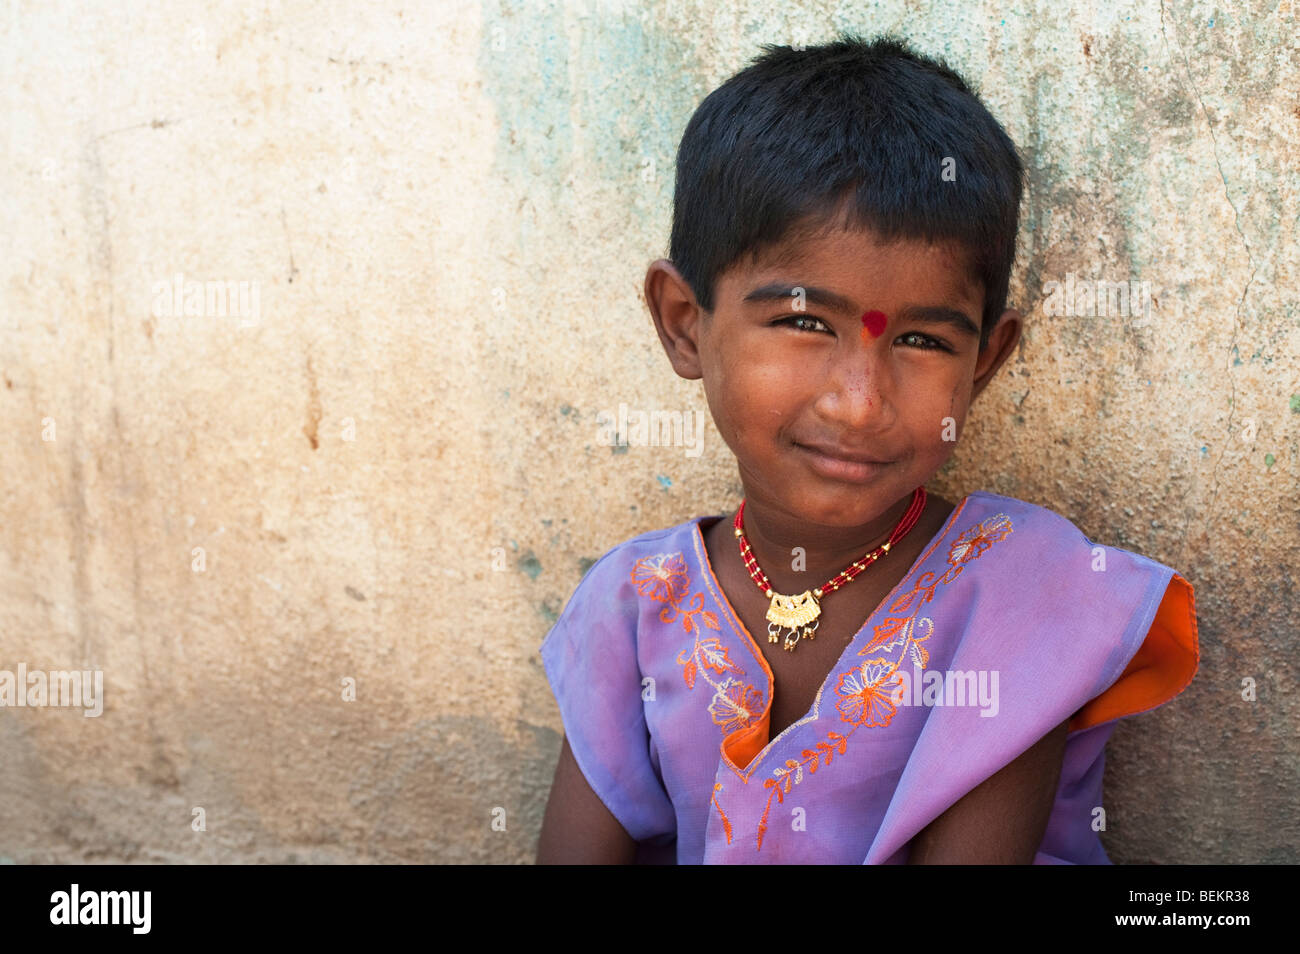 Young Indian street girl smiling leaning against a wall in India, with copy space. Stock Photo